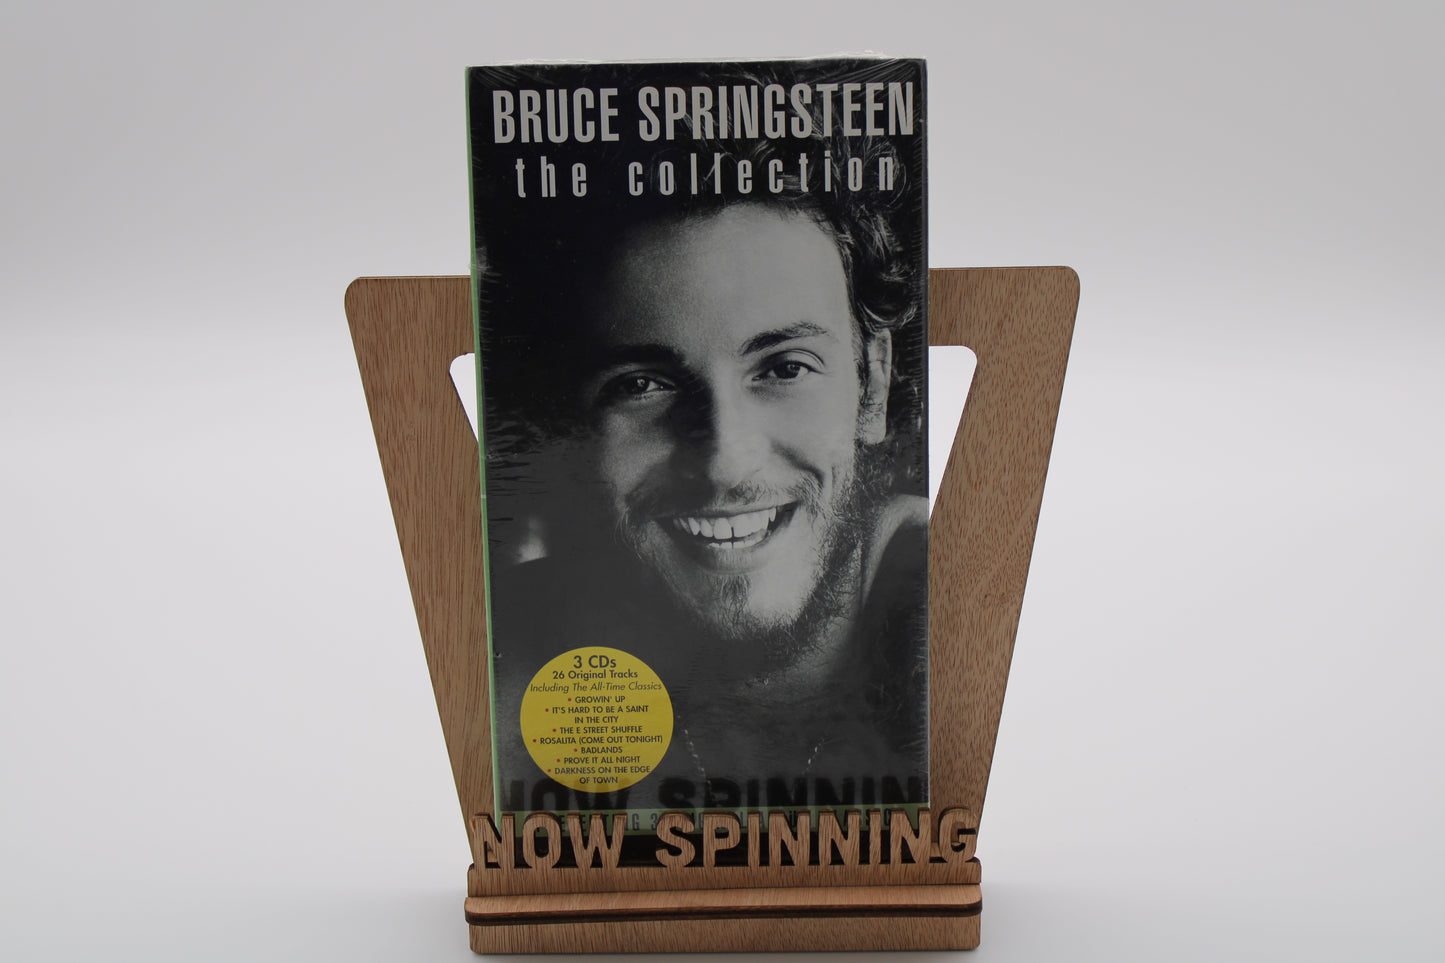 Bruce Springsteen The Collection - First 3 albums on CDs in a Box Set - Sealed